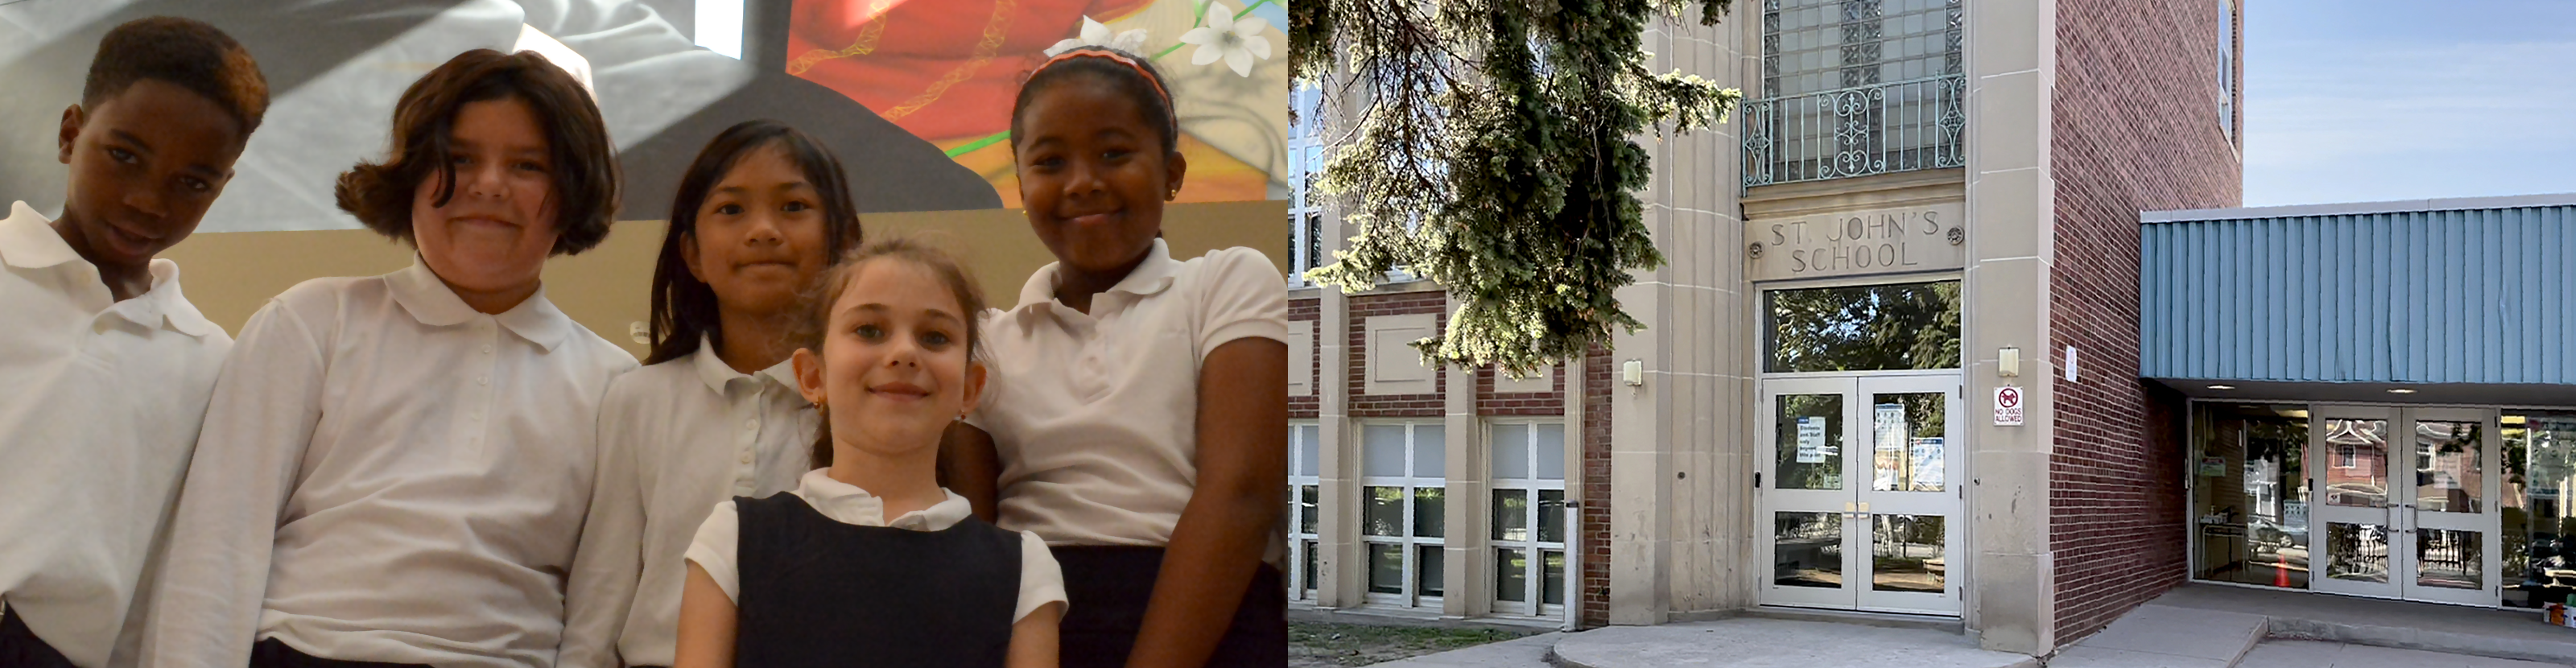 Left, a group of elementary students in white and navy school uniform. Right, the front of the St. John Catholic School building.